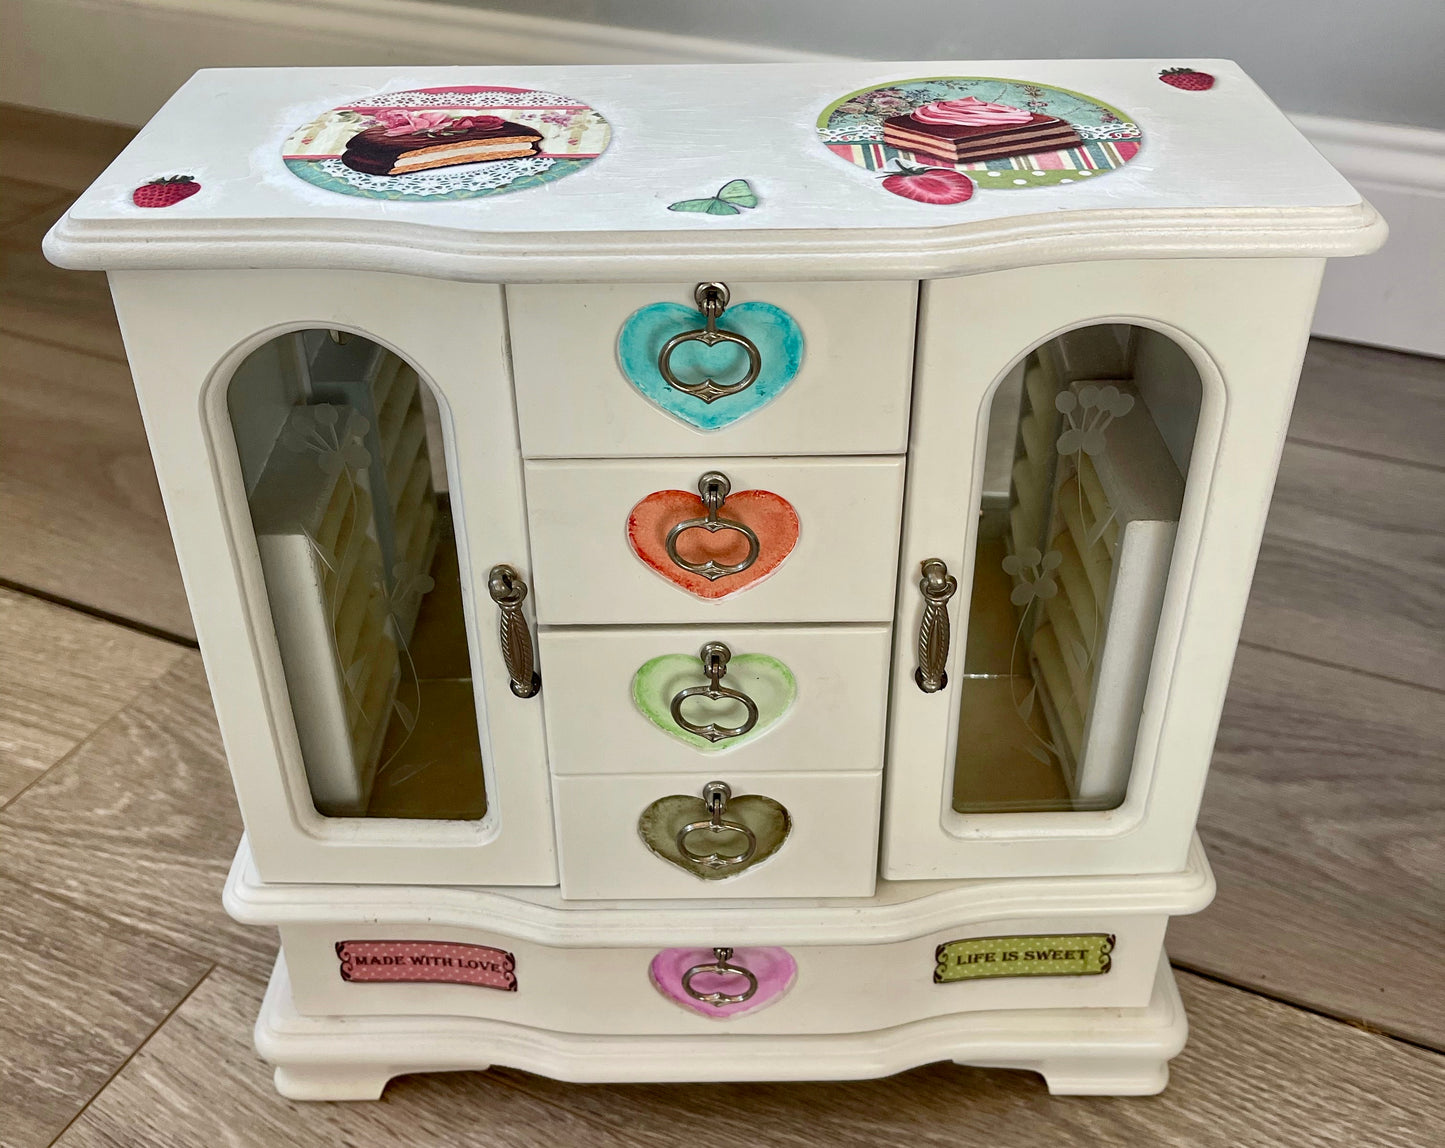 Upcycled Jewerly Cabinet, Little Girls Jewerly Cabinet, Lovecycled